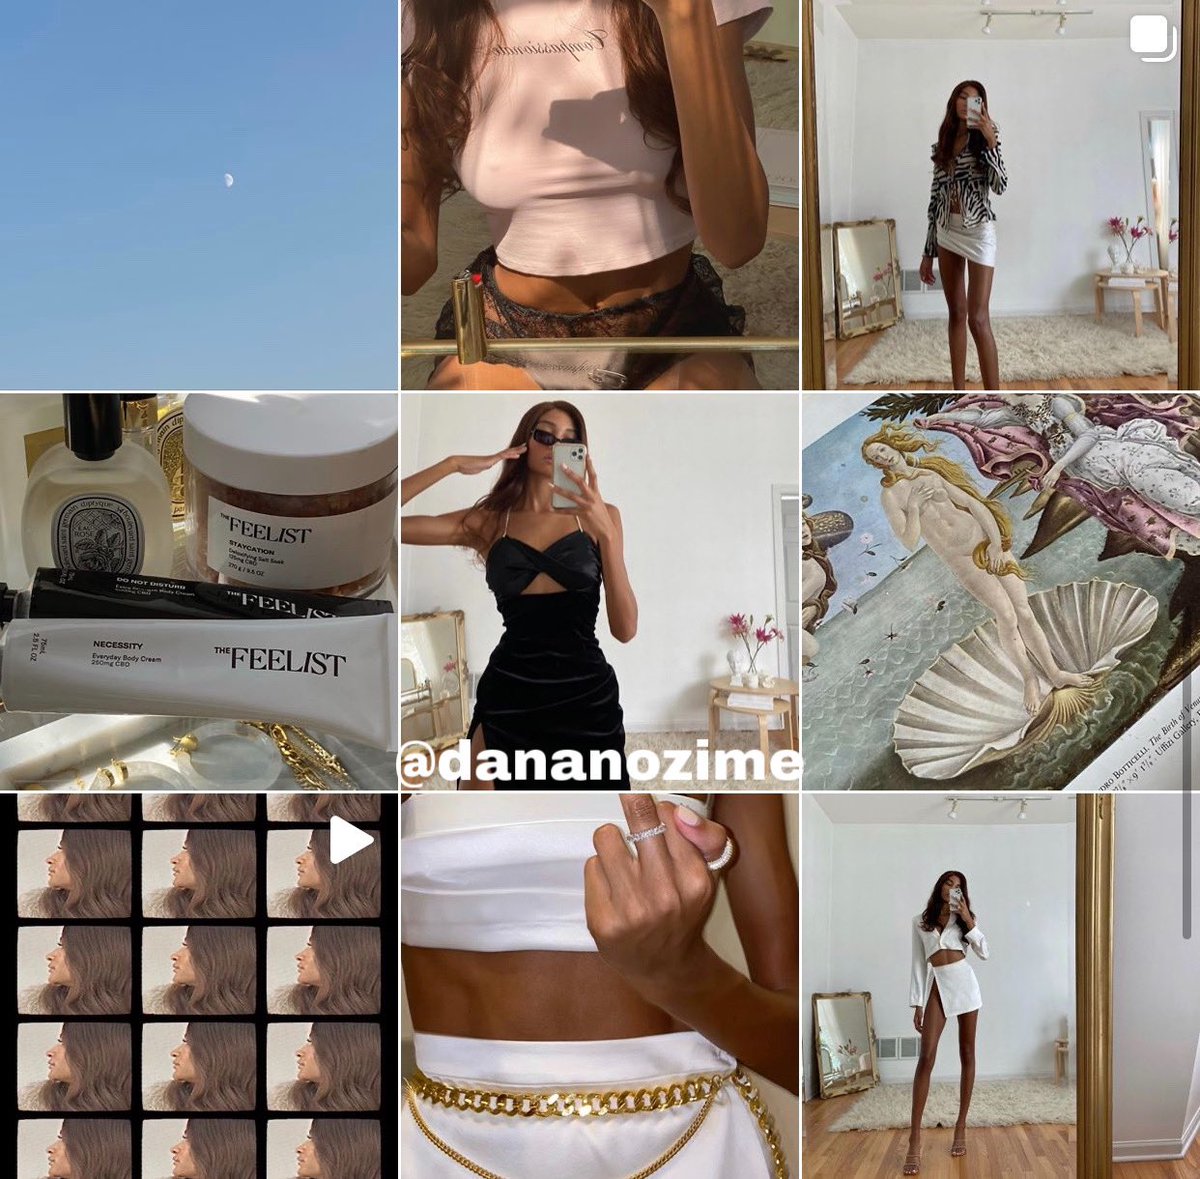 Find Your Aesthetic/Niche A good way to build yourself on ig and grow within it is to find your aesthetic and embrace it. Finding your niche can help you grow within the community! Ex of niches: Parisian, soft girl, etc